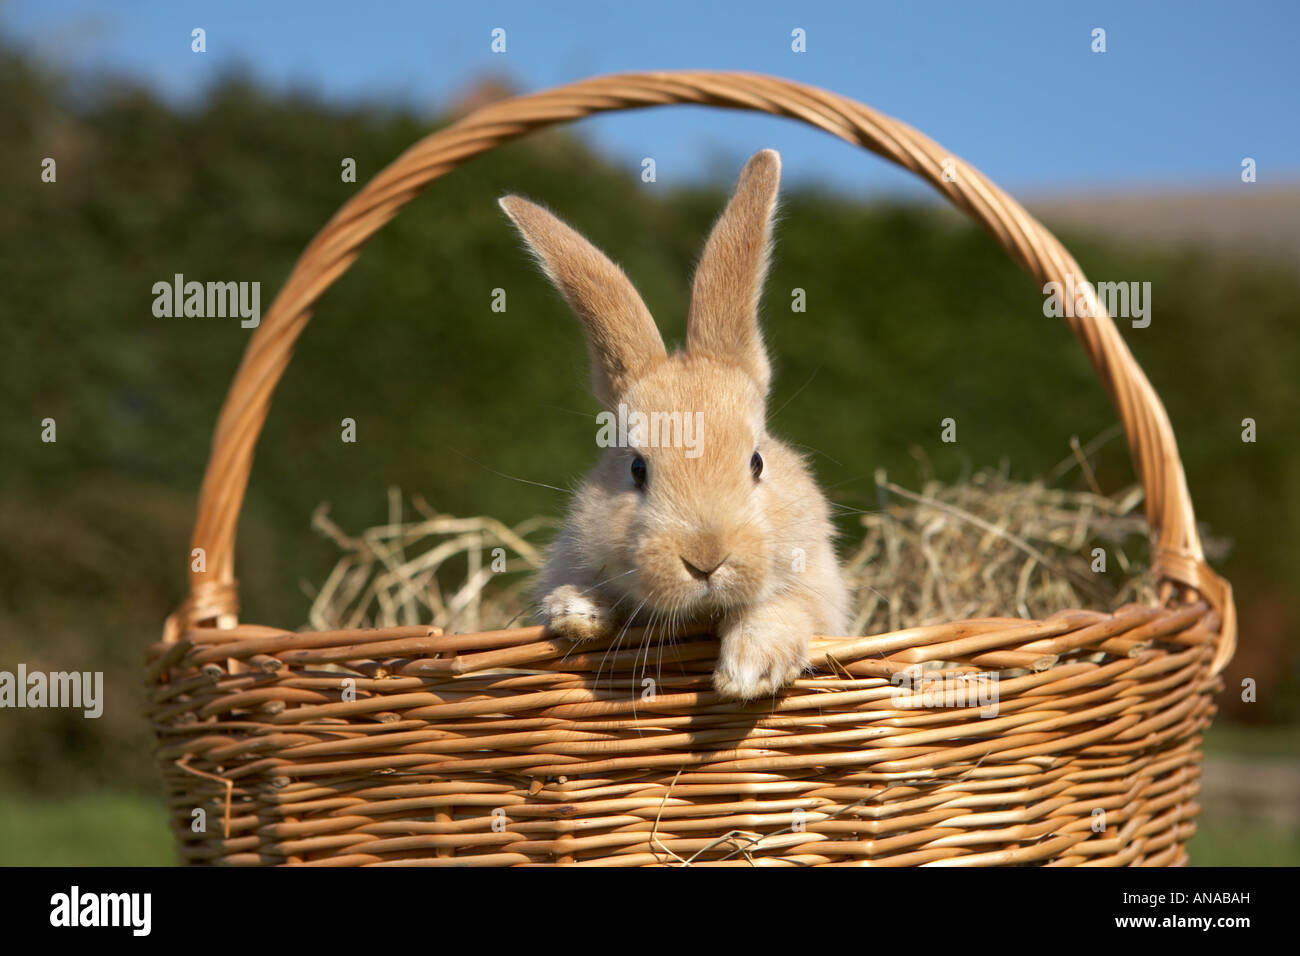 Cute Easter bunny escaping from a wicker basket Stock Photo